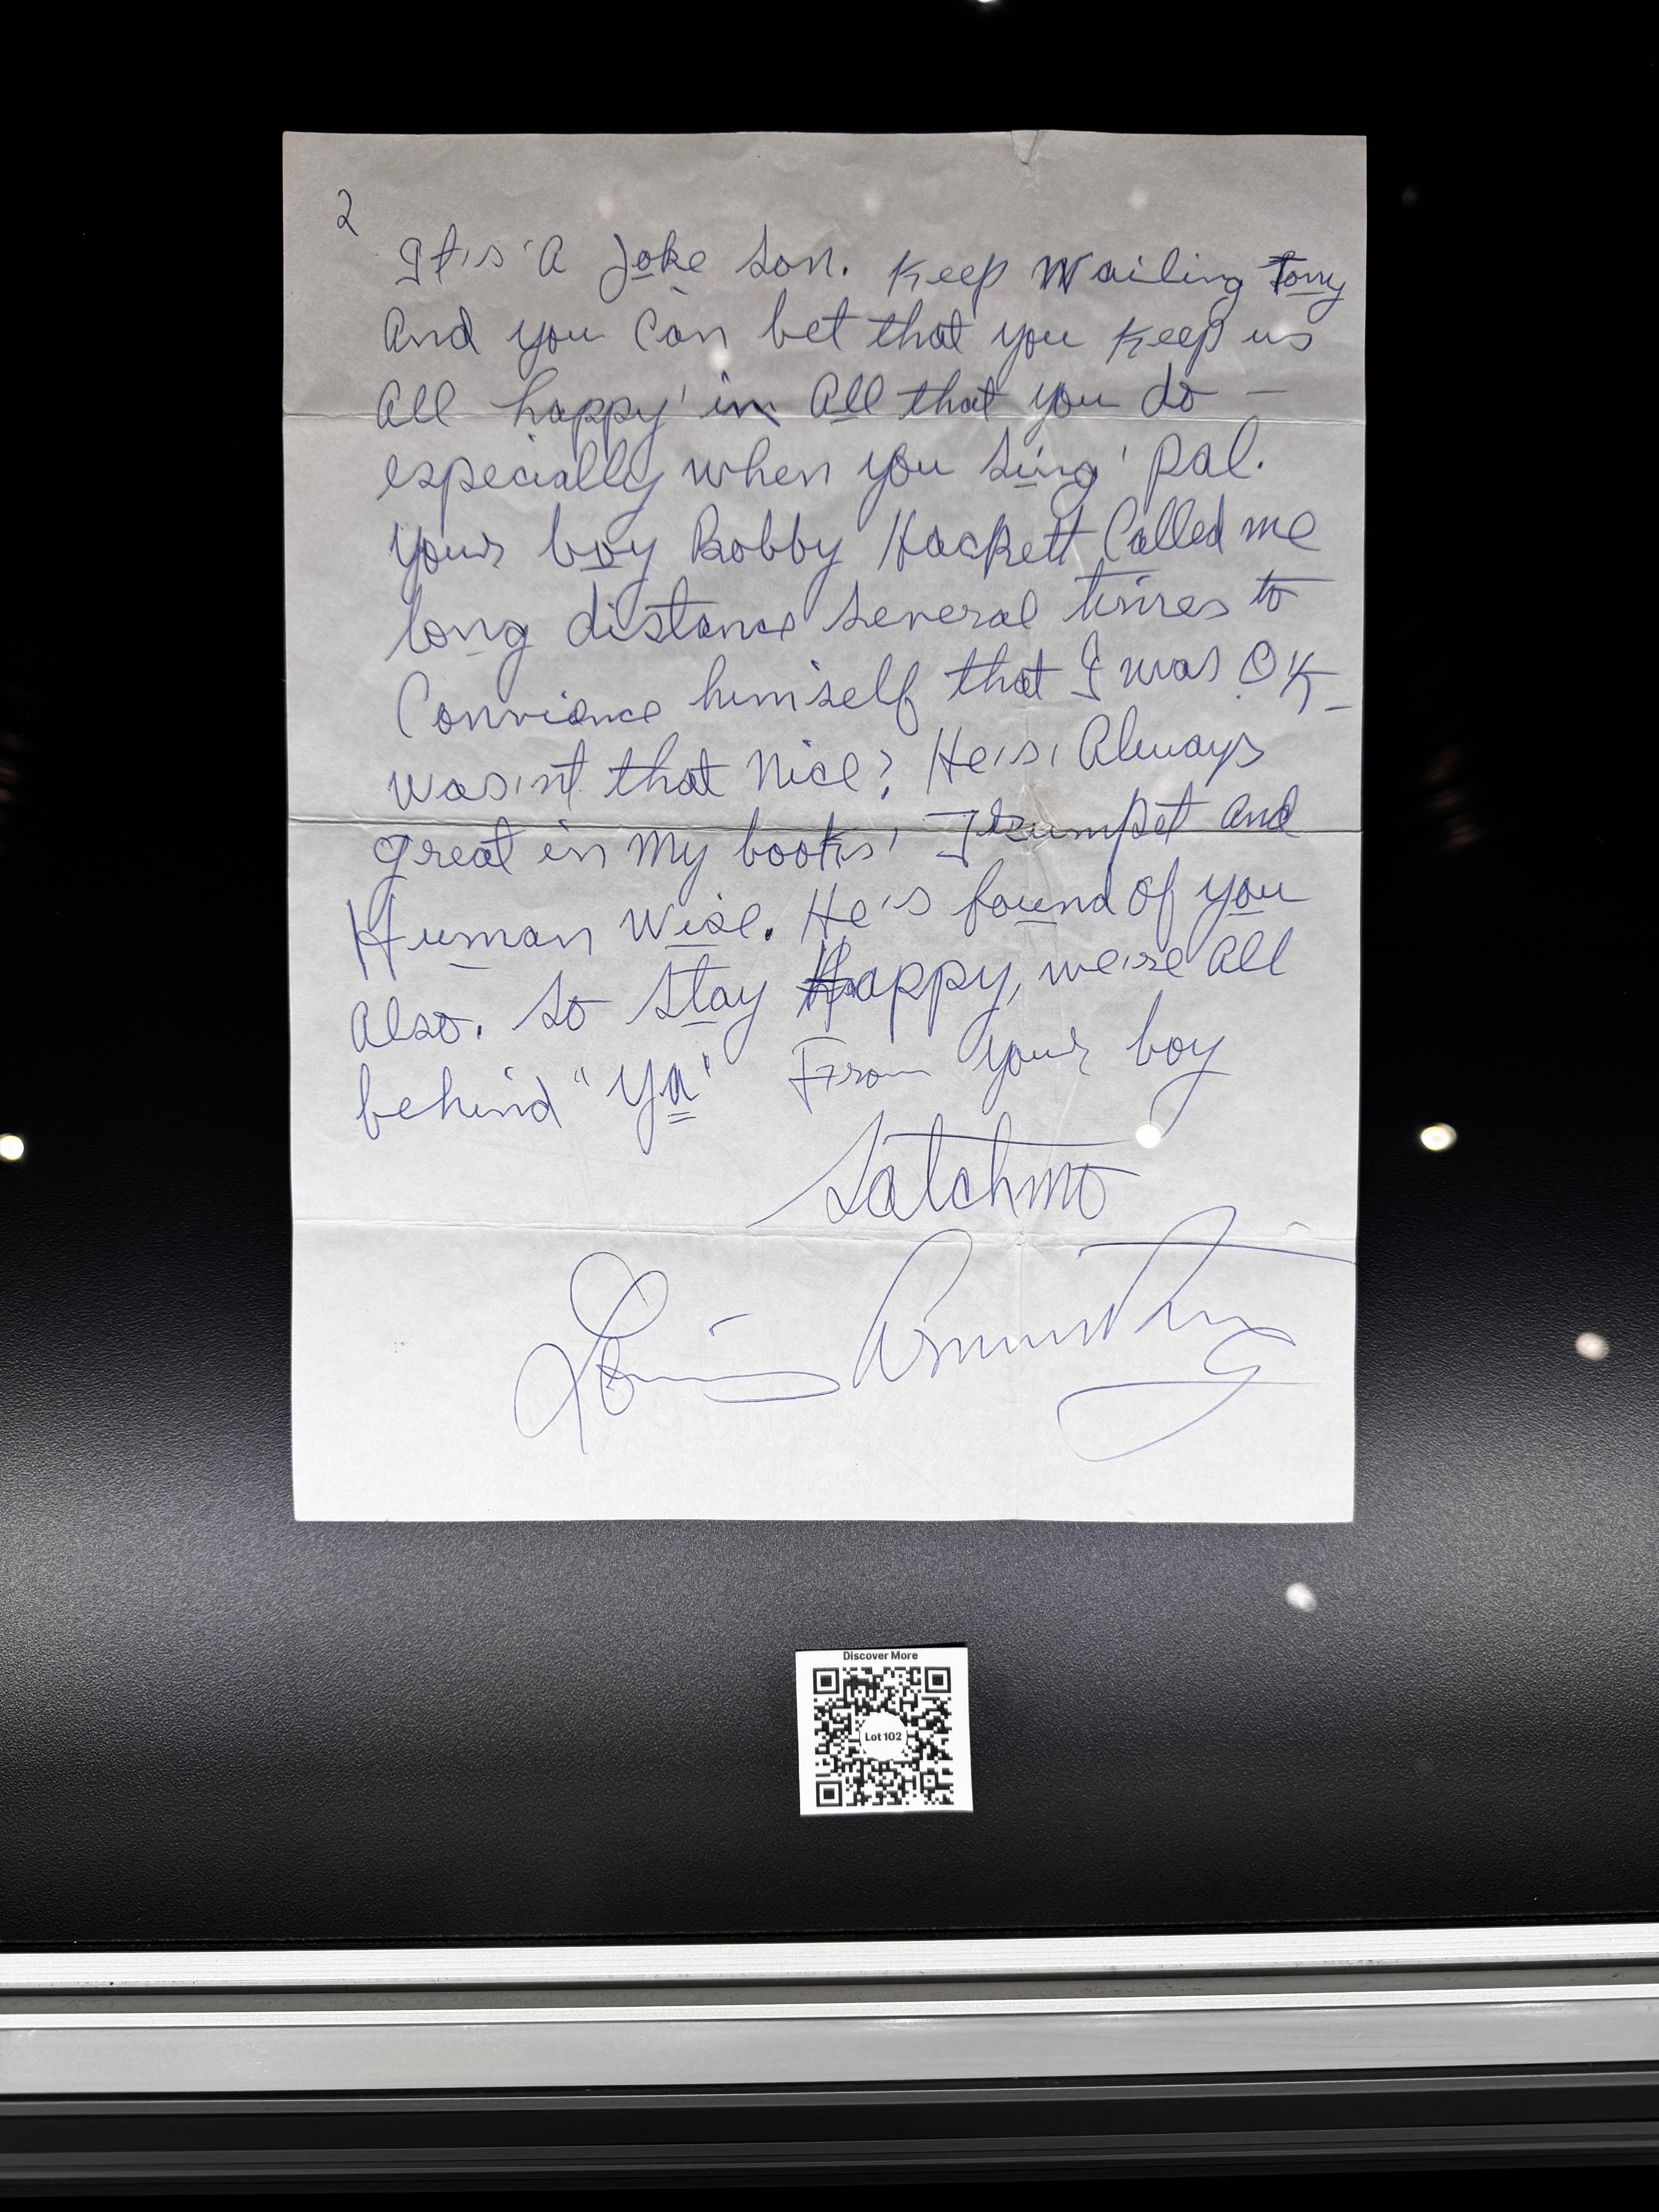 A handwritten letter on a black background